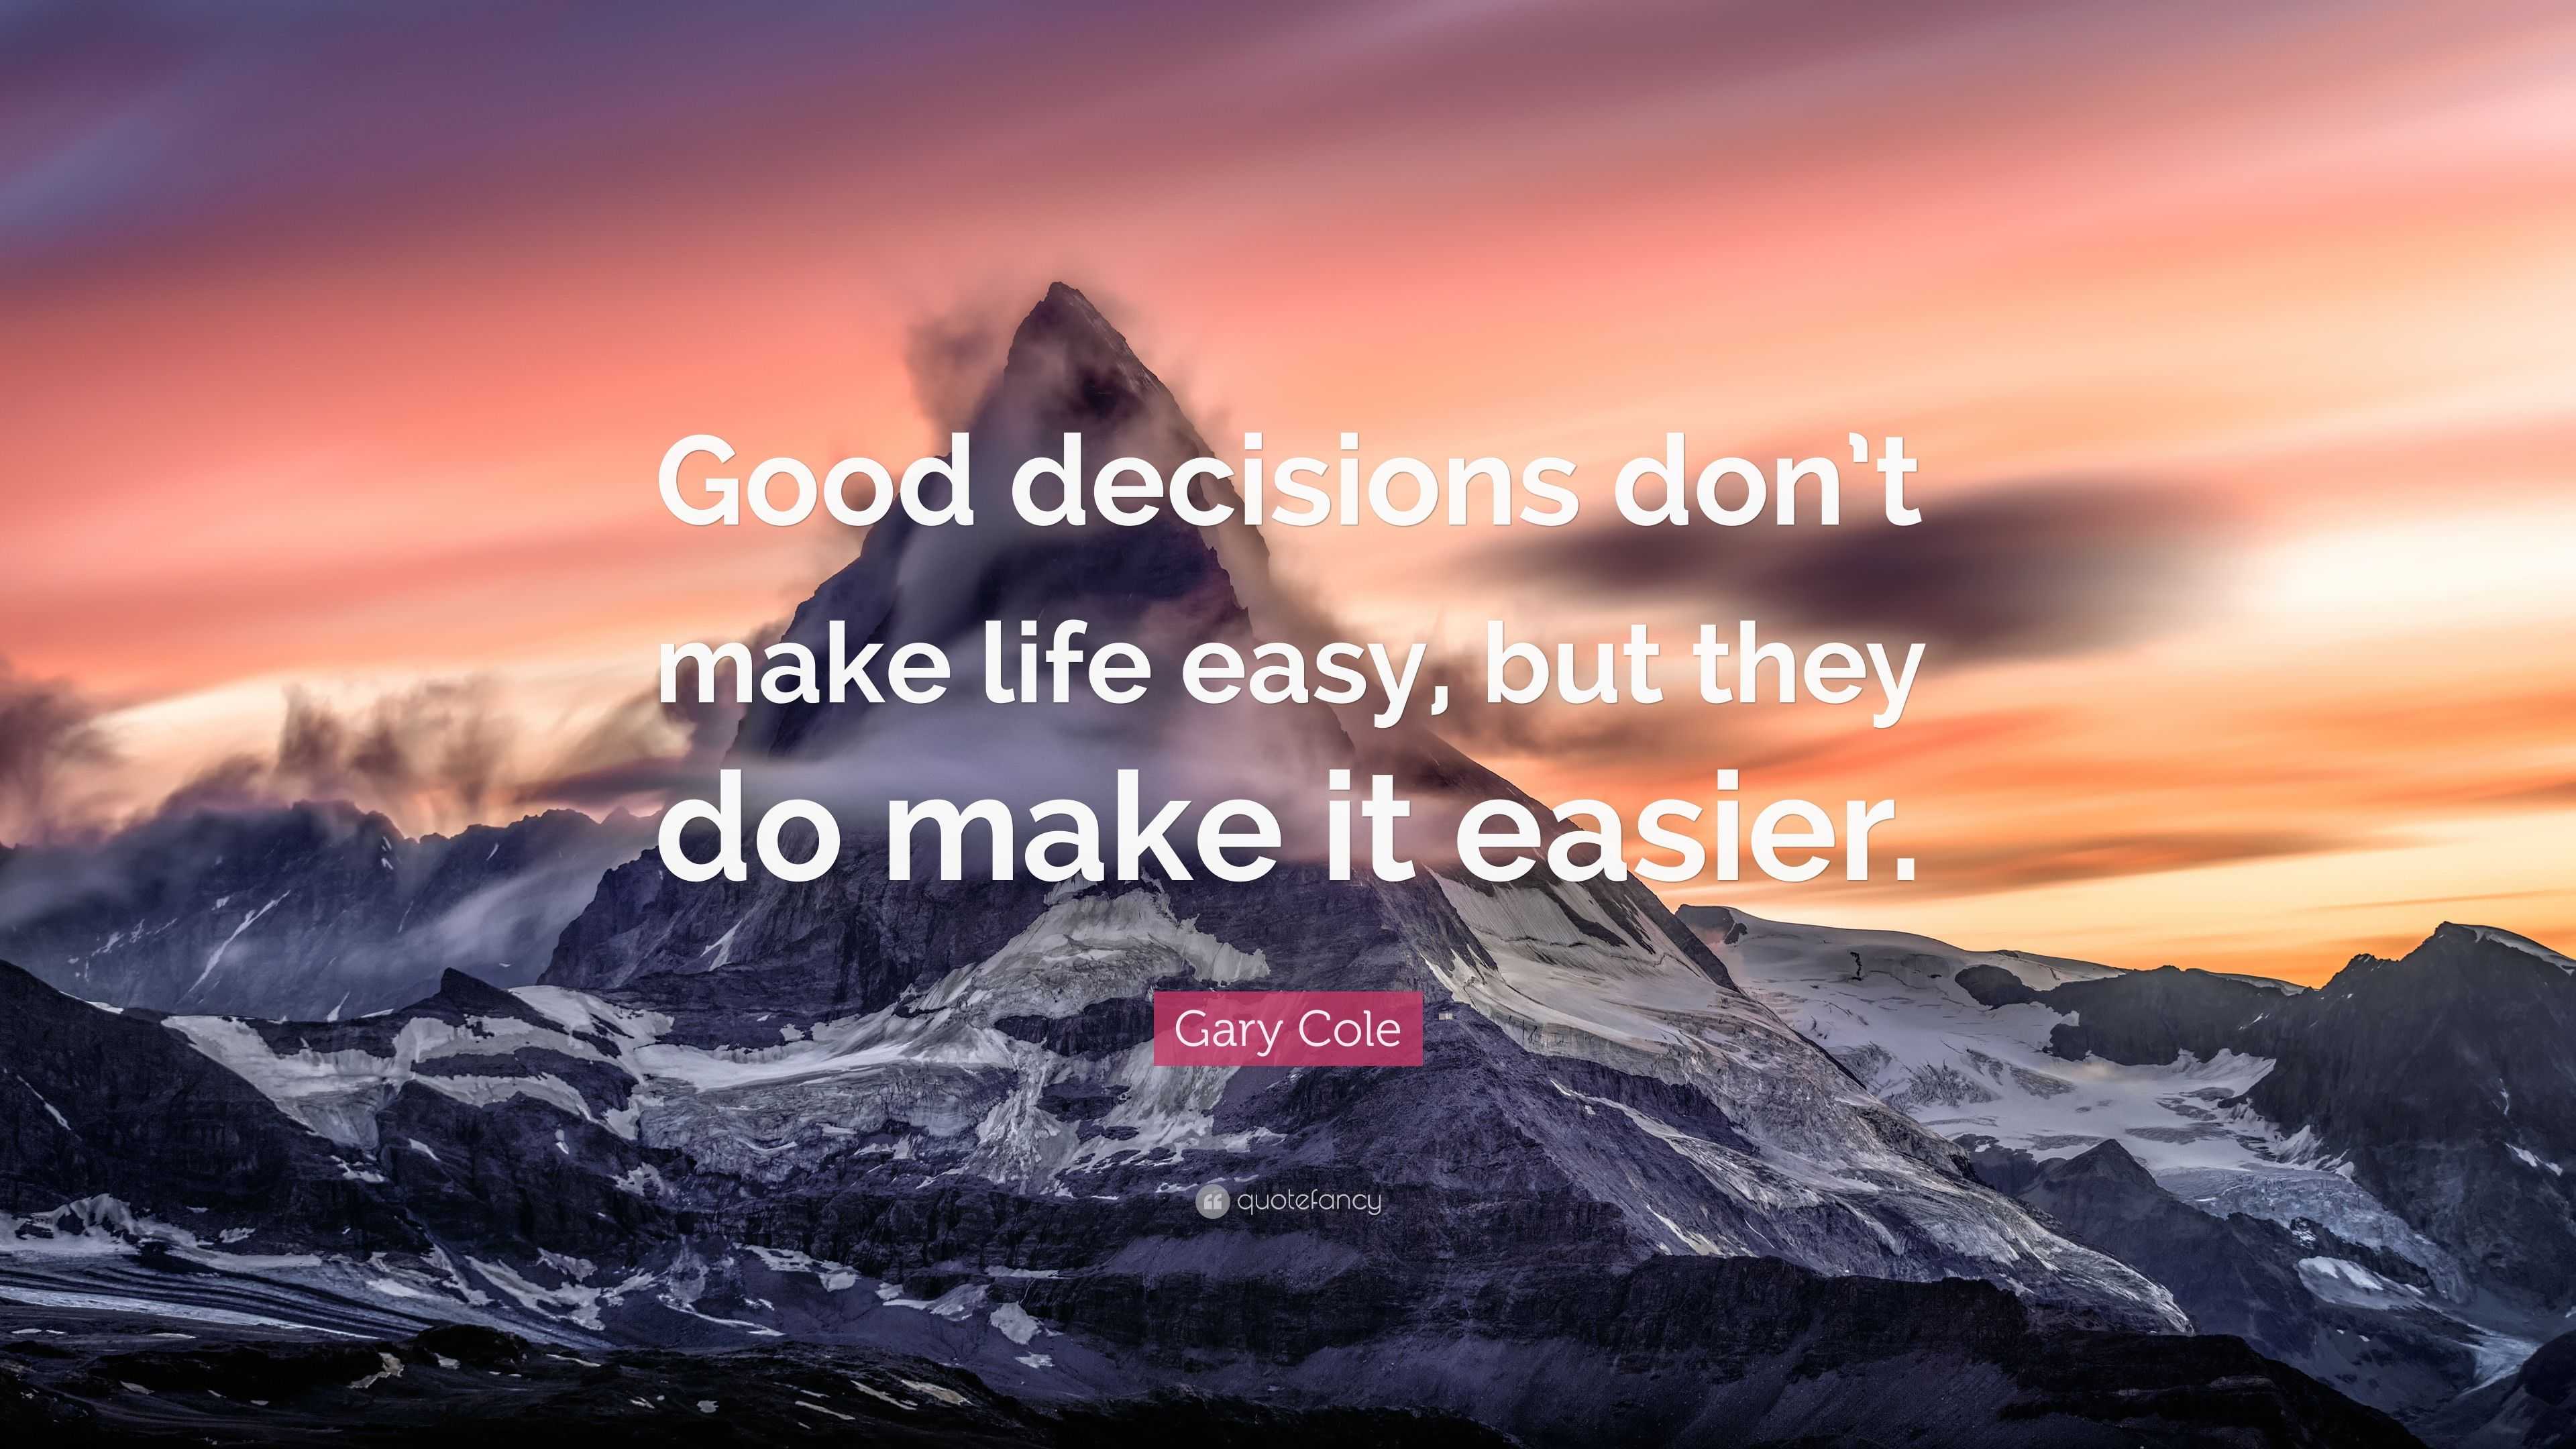 Gary Cole Quote: “Good decisions don't make life easy, but they do